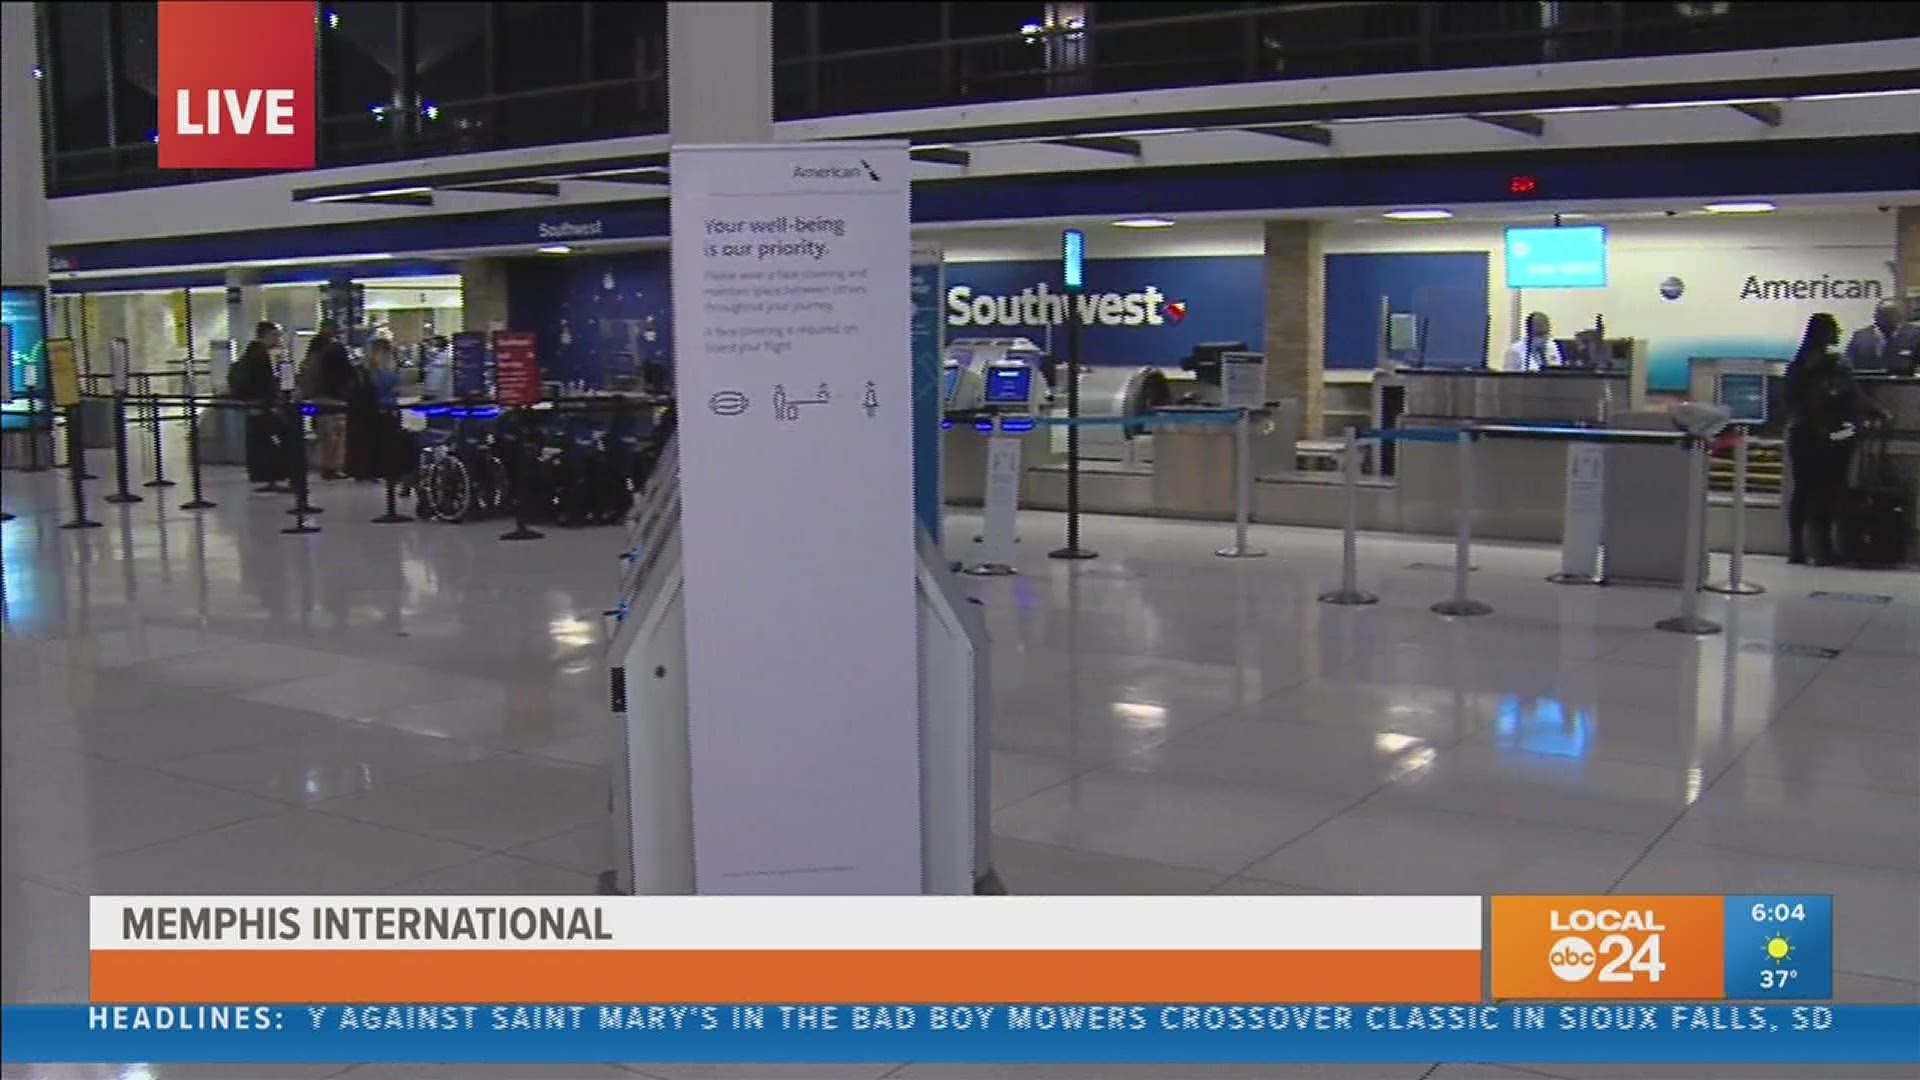 The TSA reports Friday saw the second highest number of fliers since the start of the pandemic